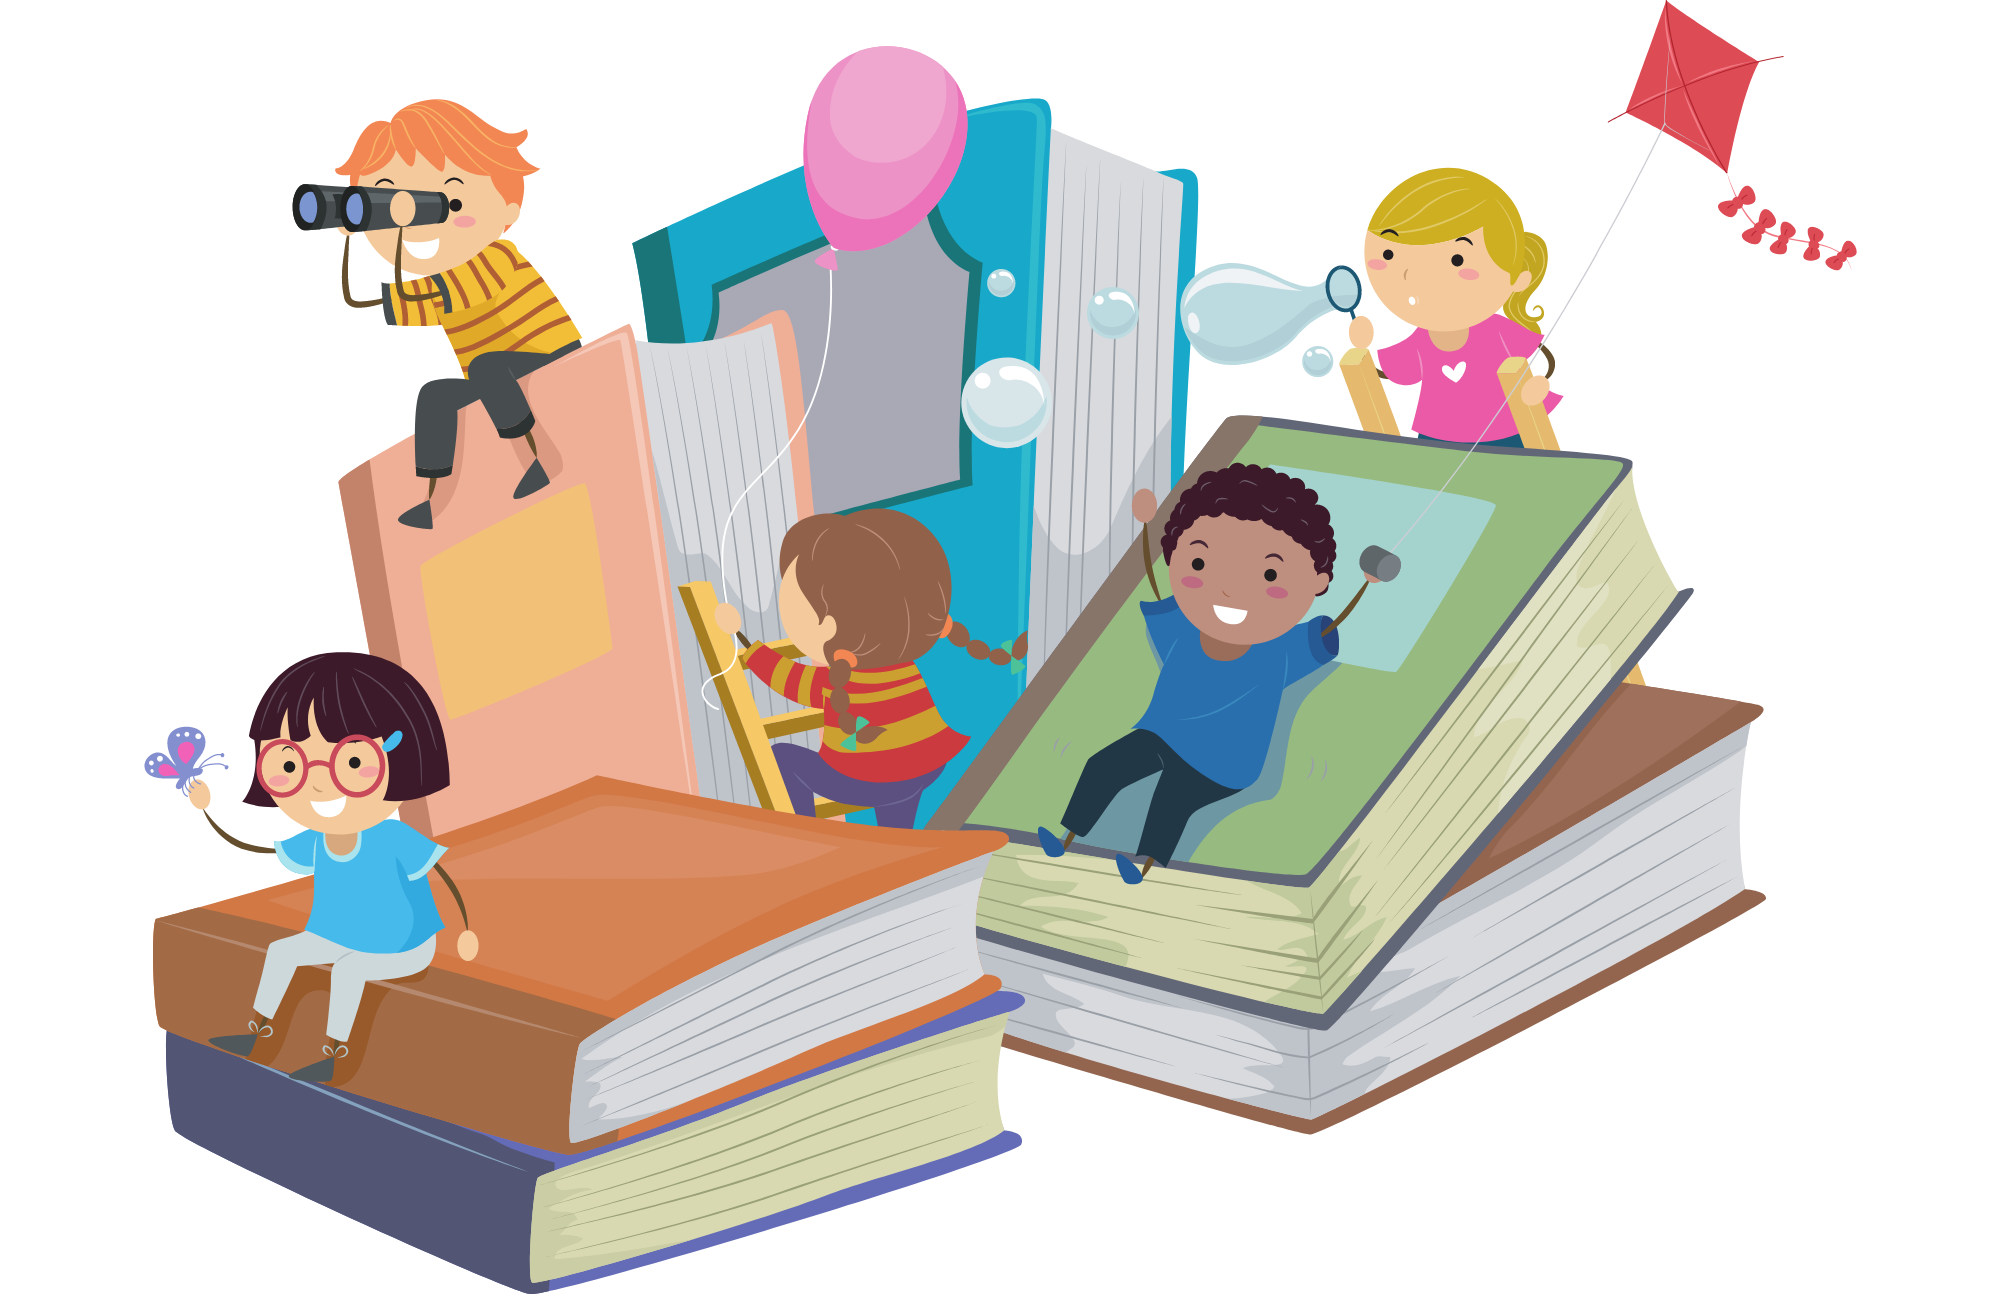 Cartoon image of children playing on giant stacks of books